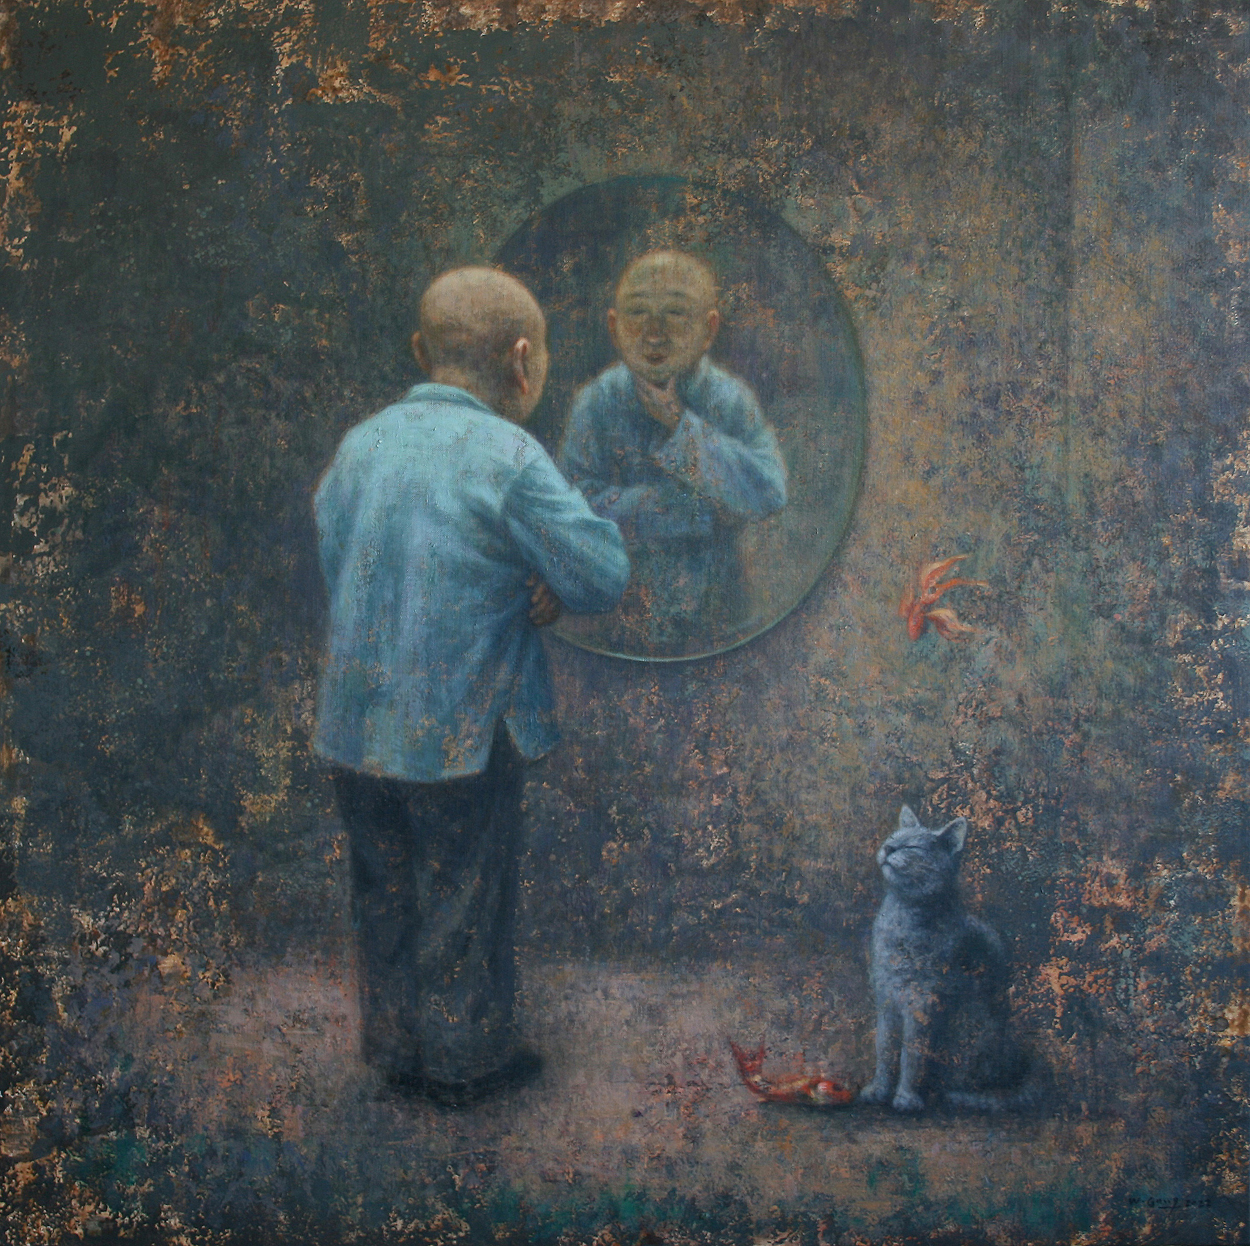 Wang Gang - At the mirror - oil on canvas - d'Haudrecy Art Gallery